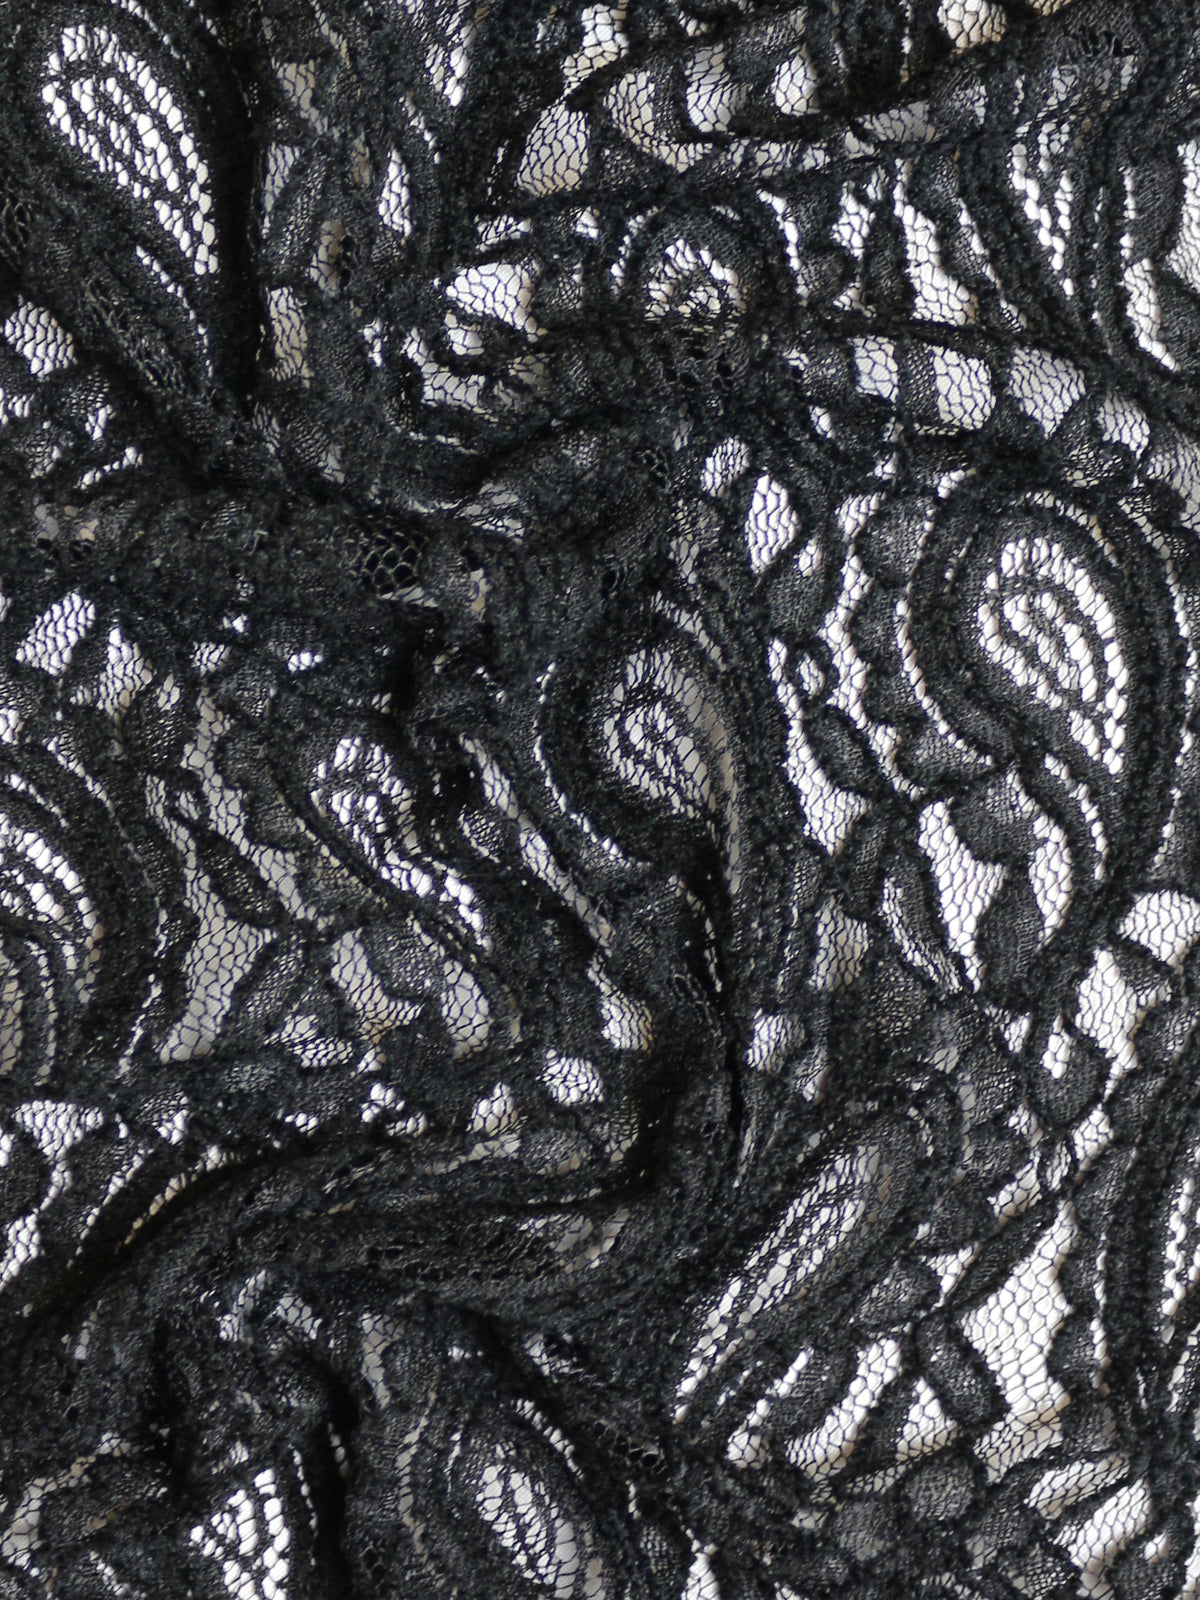  Black Raschel Lace Fabric – Sold by The Yard (FB